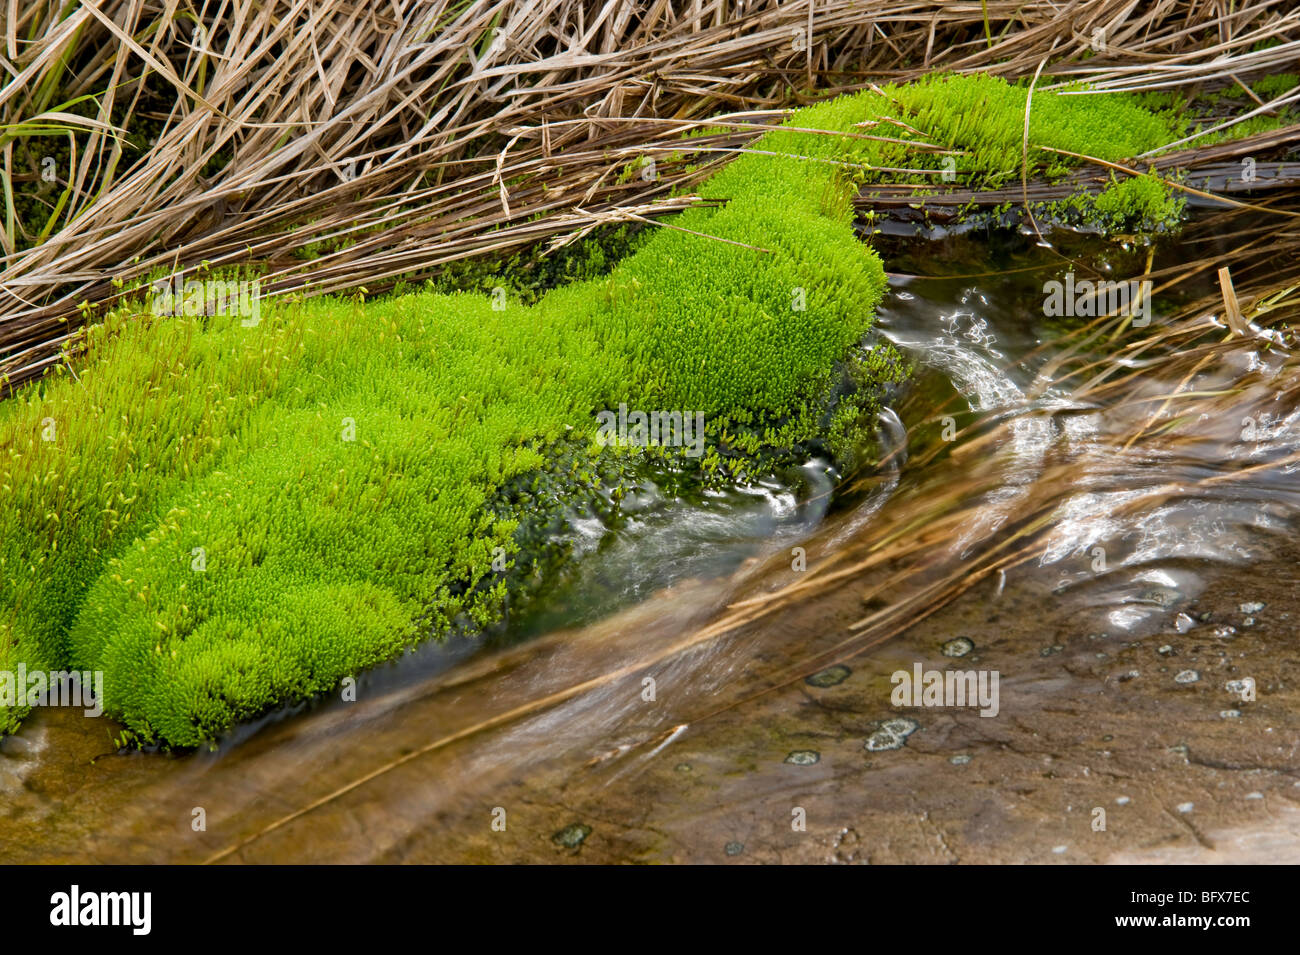 Beds of Pohlia moss at edge of small stream running off over rock outcrops, Greater Sudbury, Ontario, Canada Stock Photo